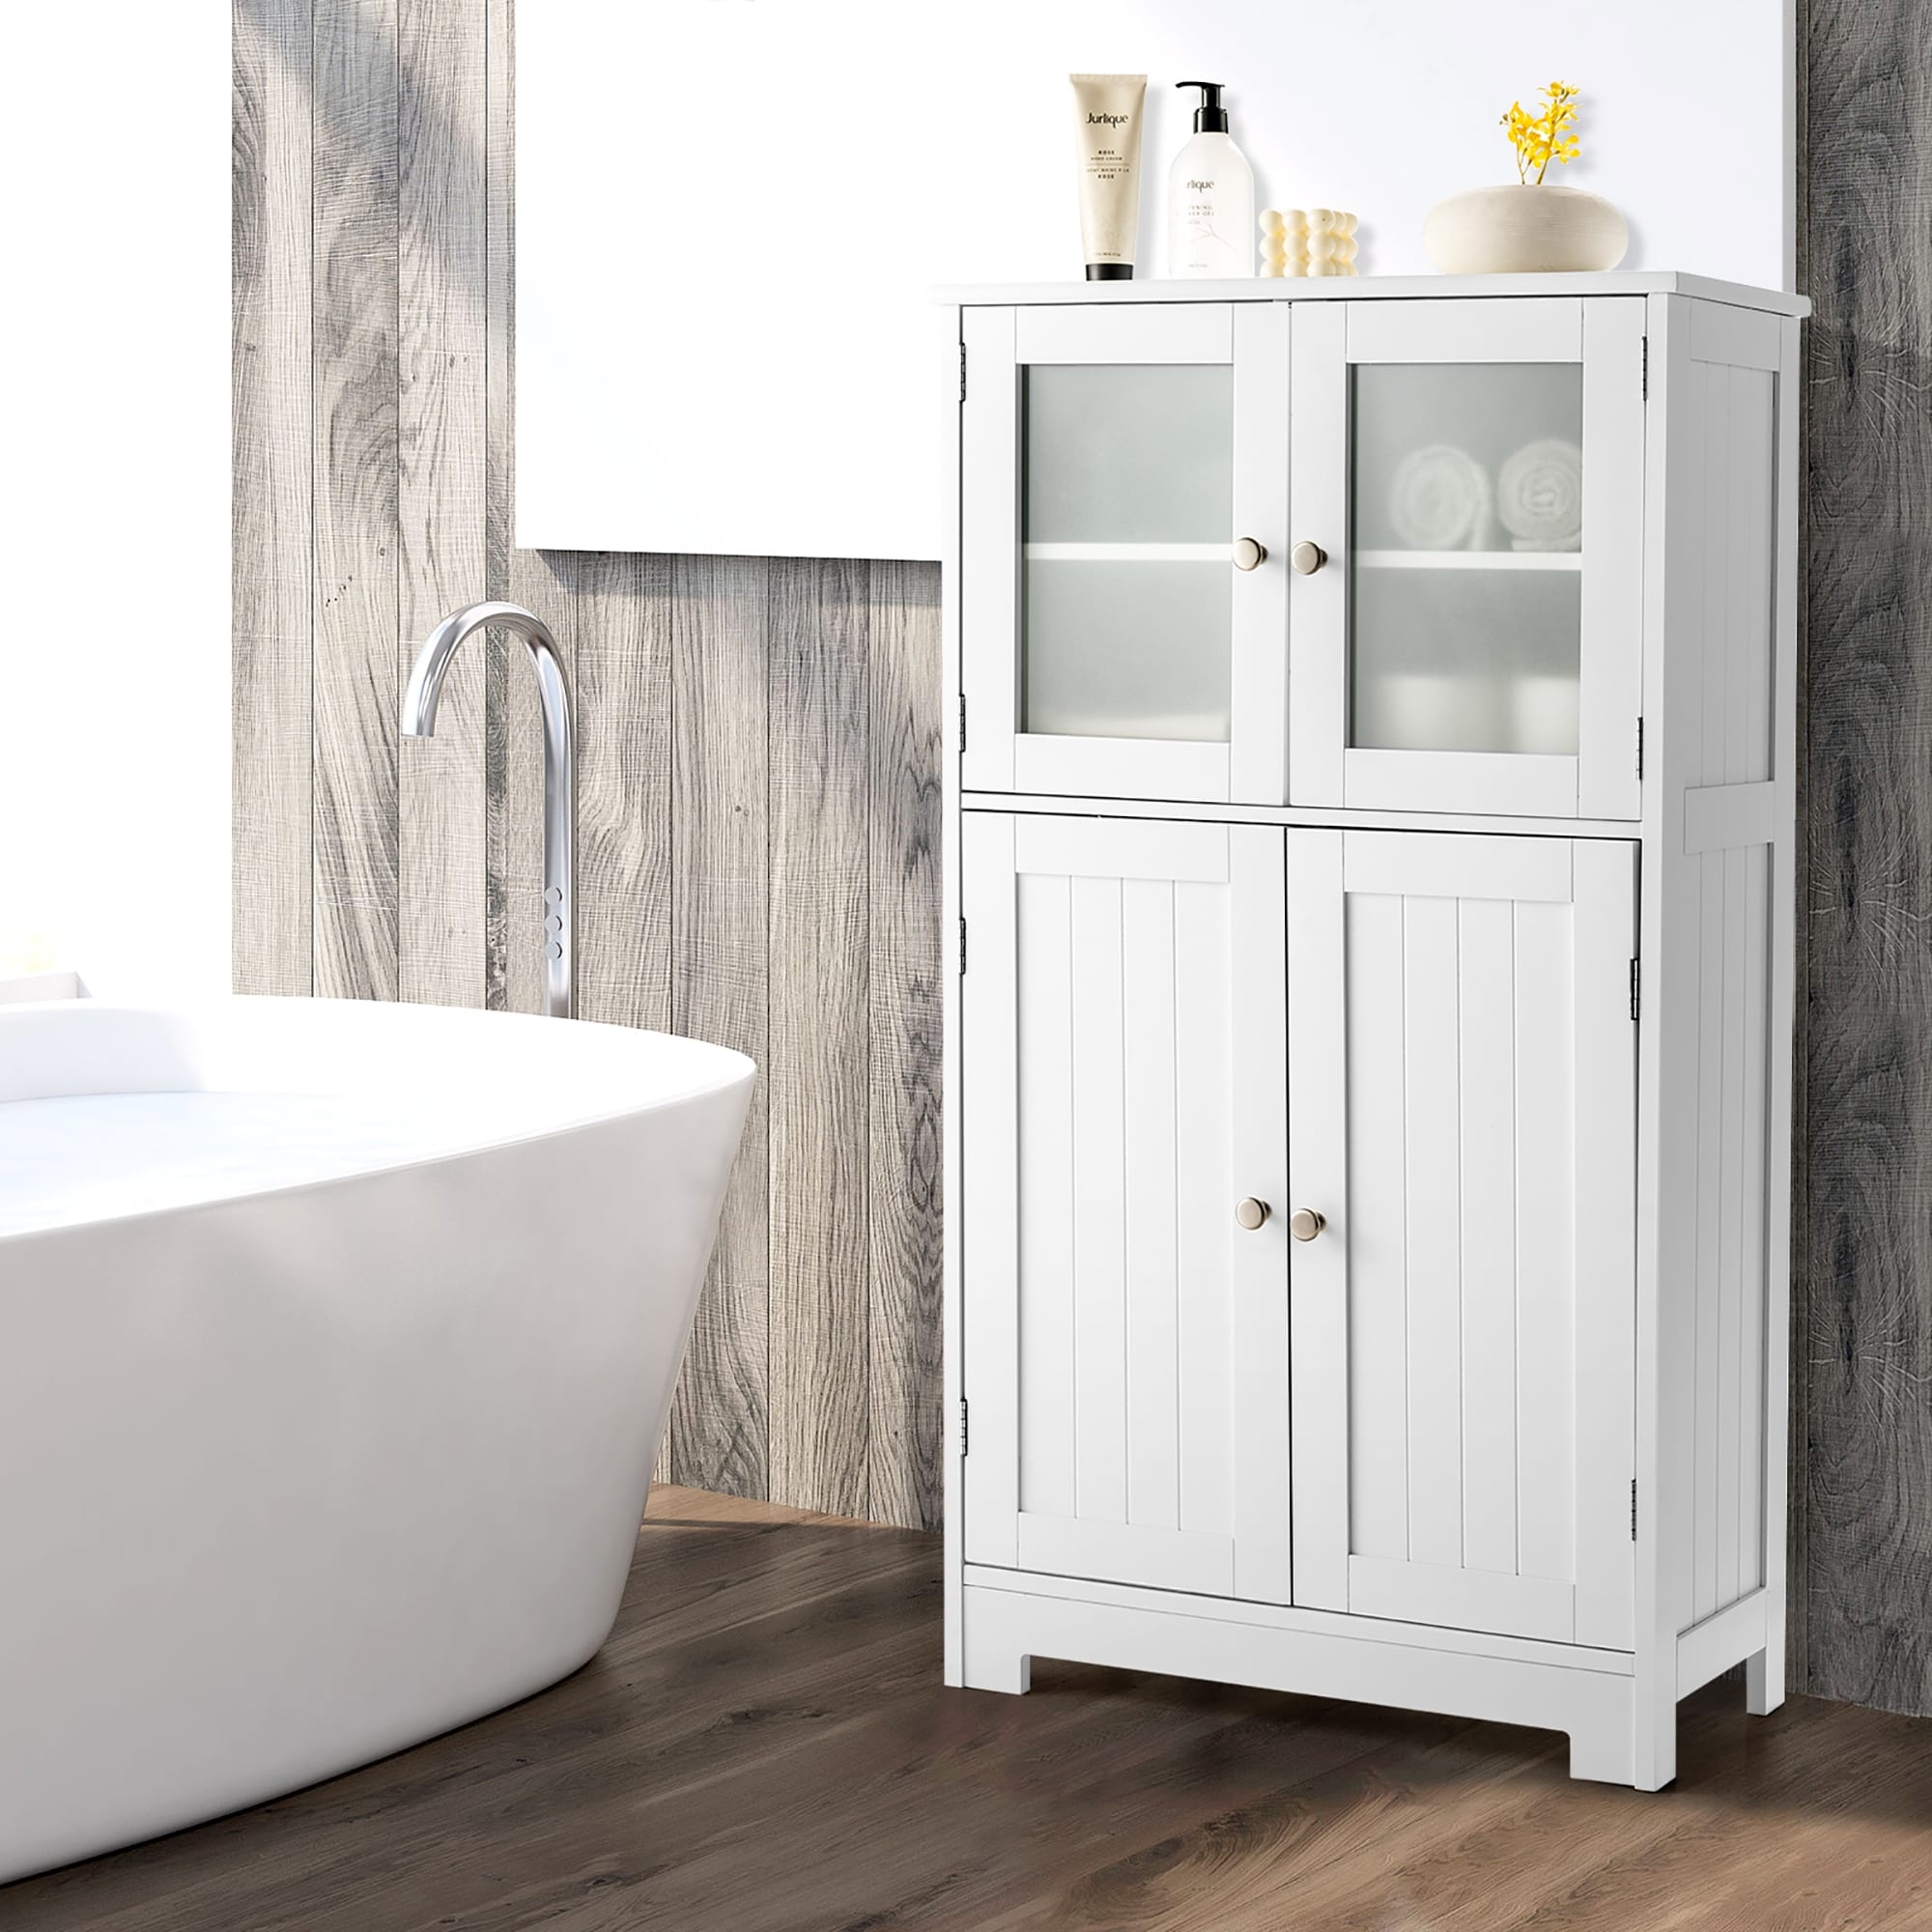 https://ak1.ostkcdn.com/images/products/is/images/direct/7e7d4f2d600a3cb1b816126ecd0c2c3e0d46088d/Bathroom-Floor-Cabinet-Freestanding-Storage-Cabinet-with-4-Glass-Doors.jpg